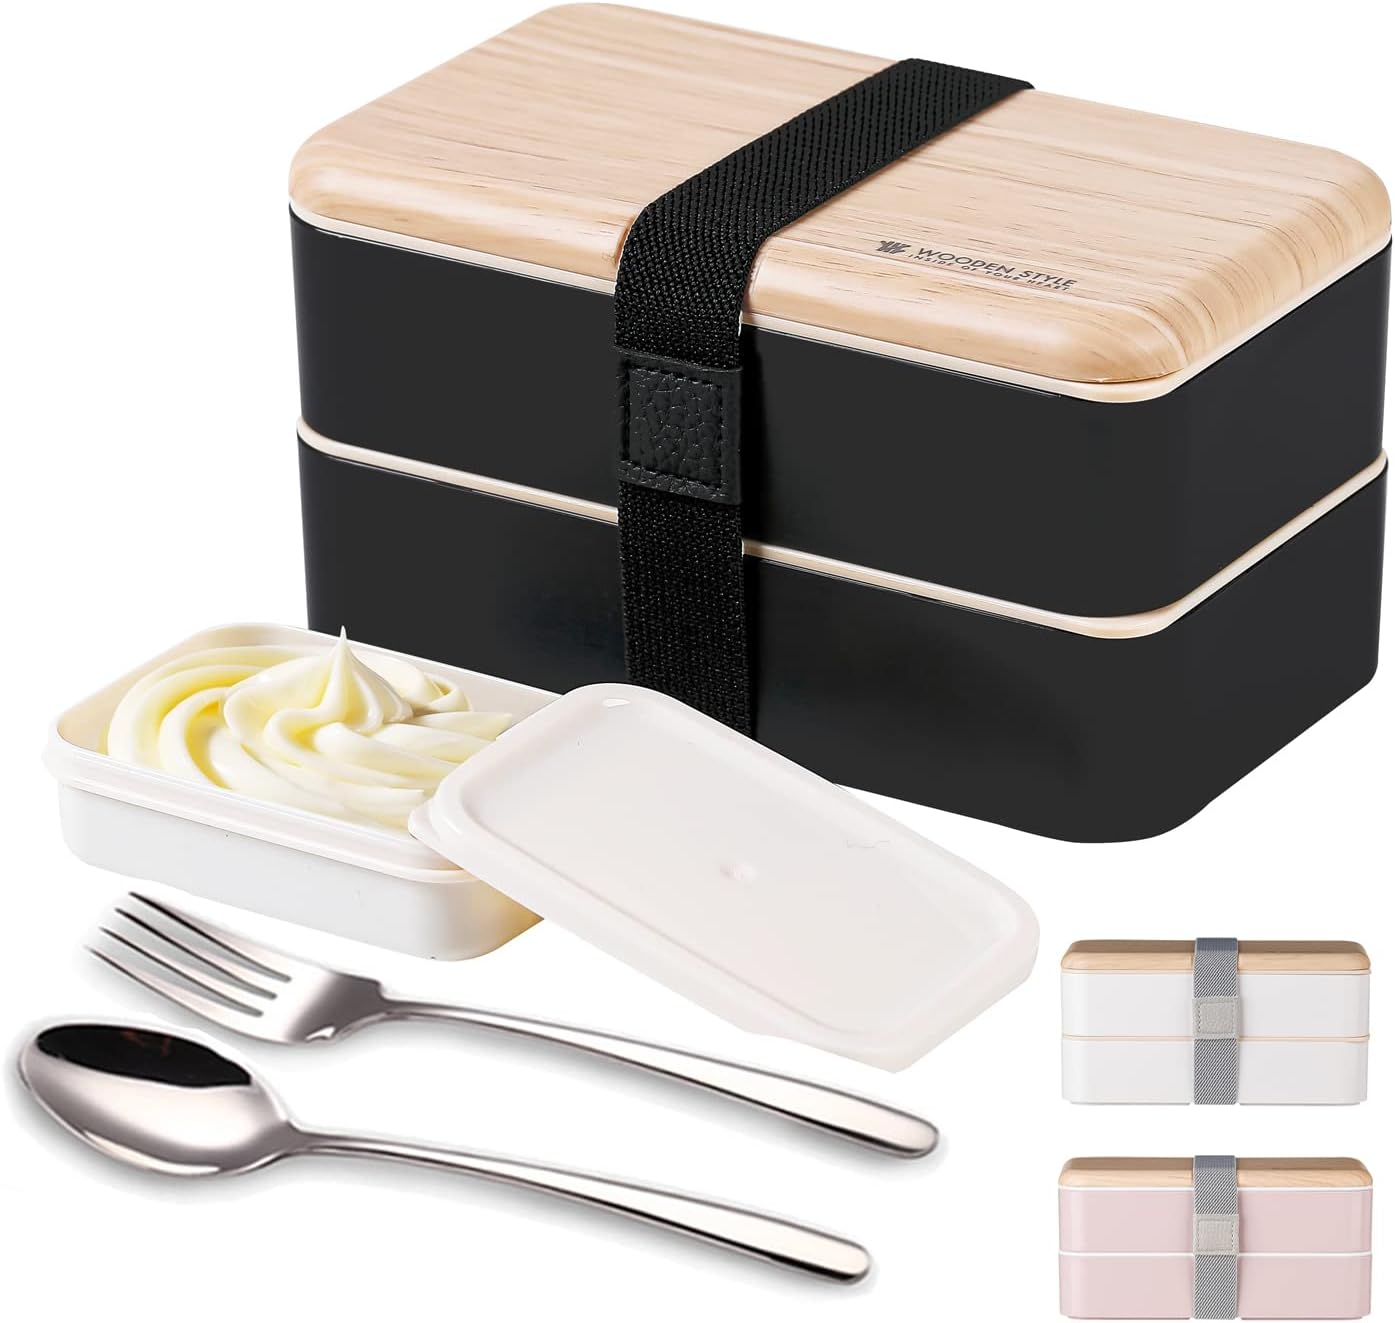 B08L6DF1VY Original Bento Box Lunch Boxes Container Bundle Divider Japanese Style with Stainless Steel